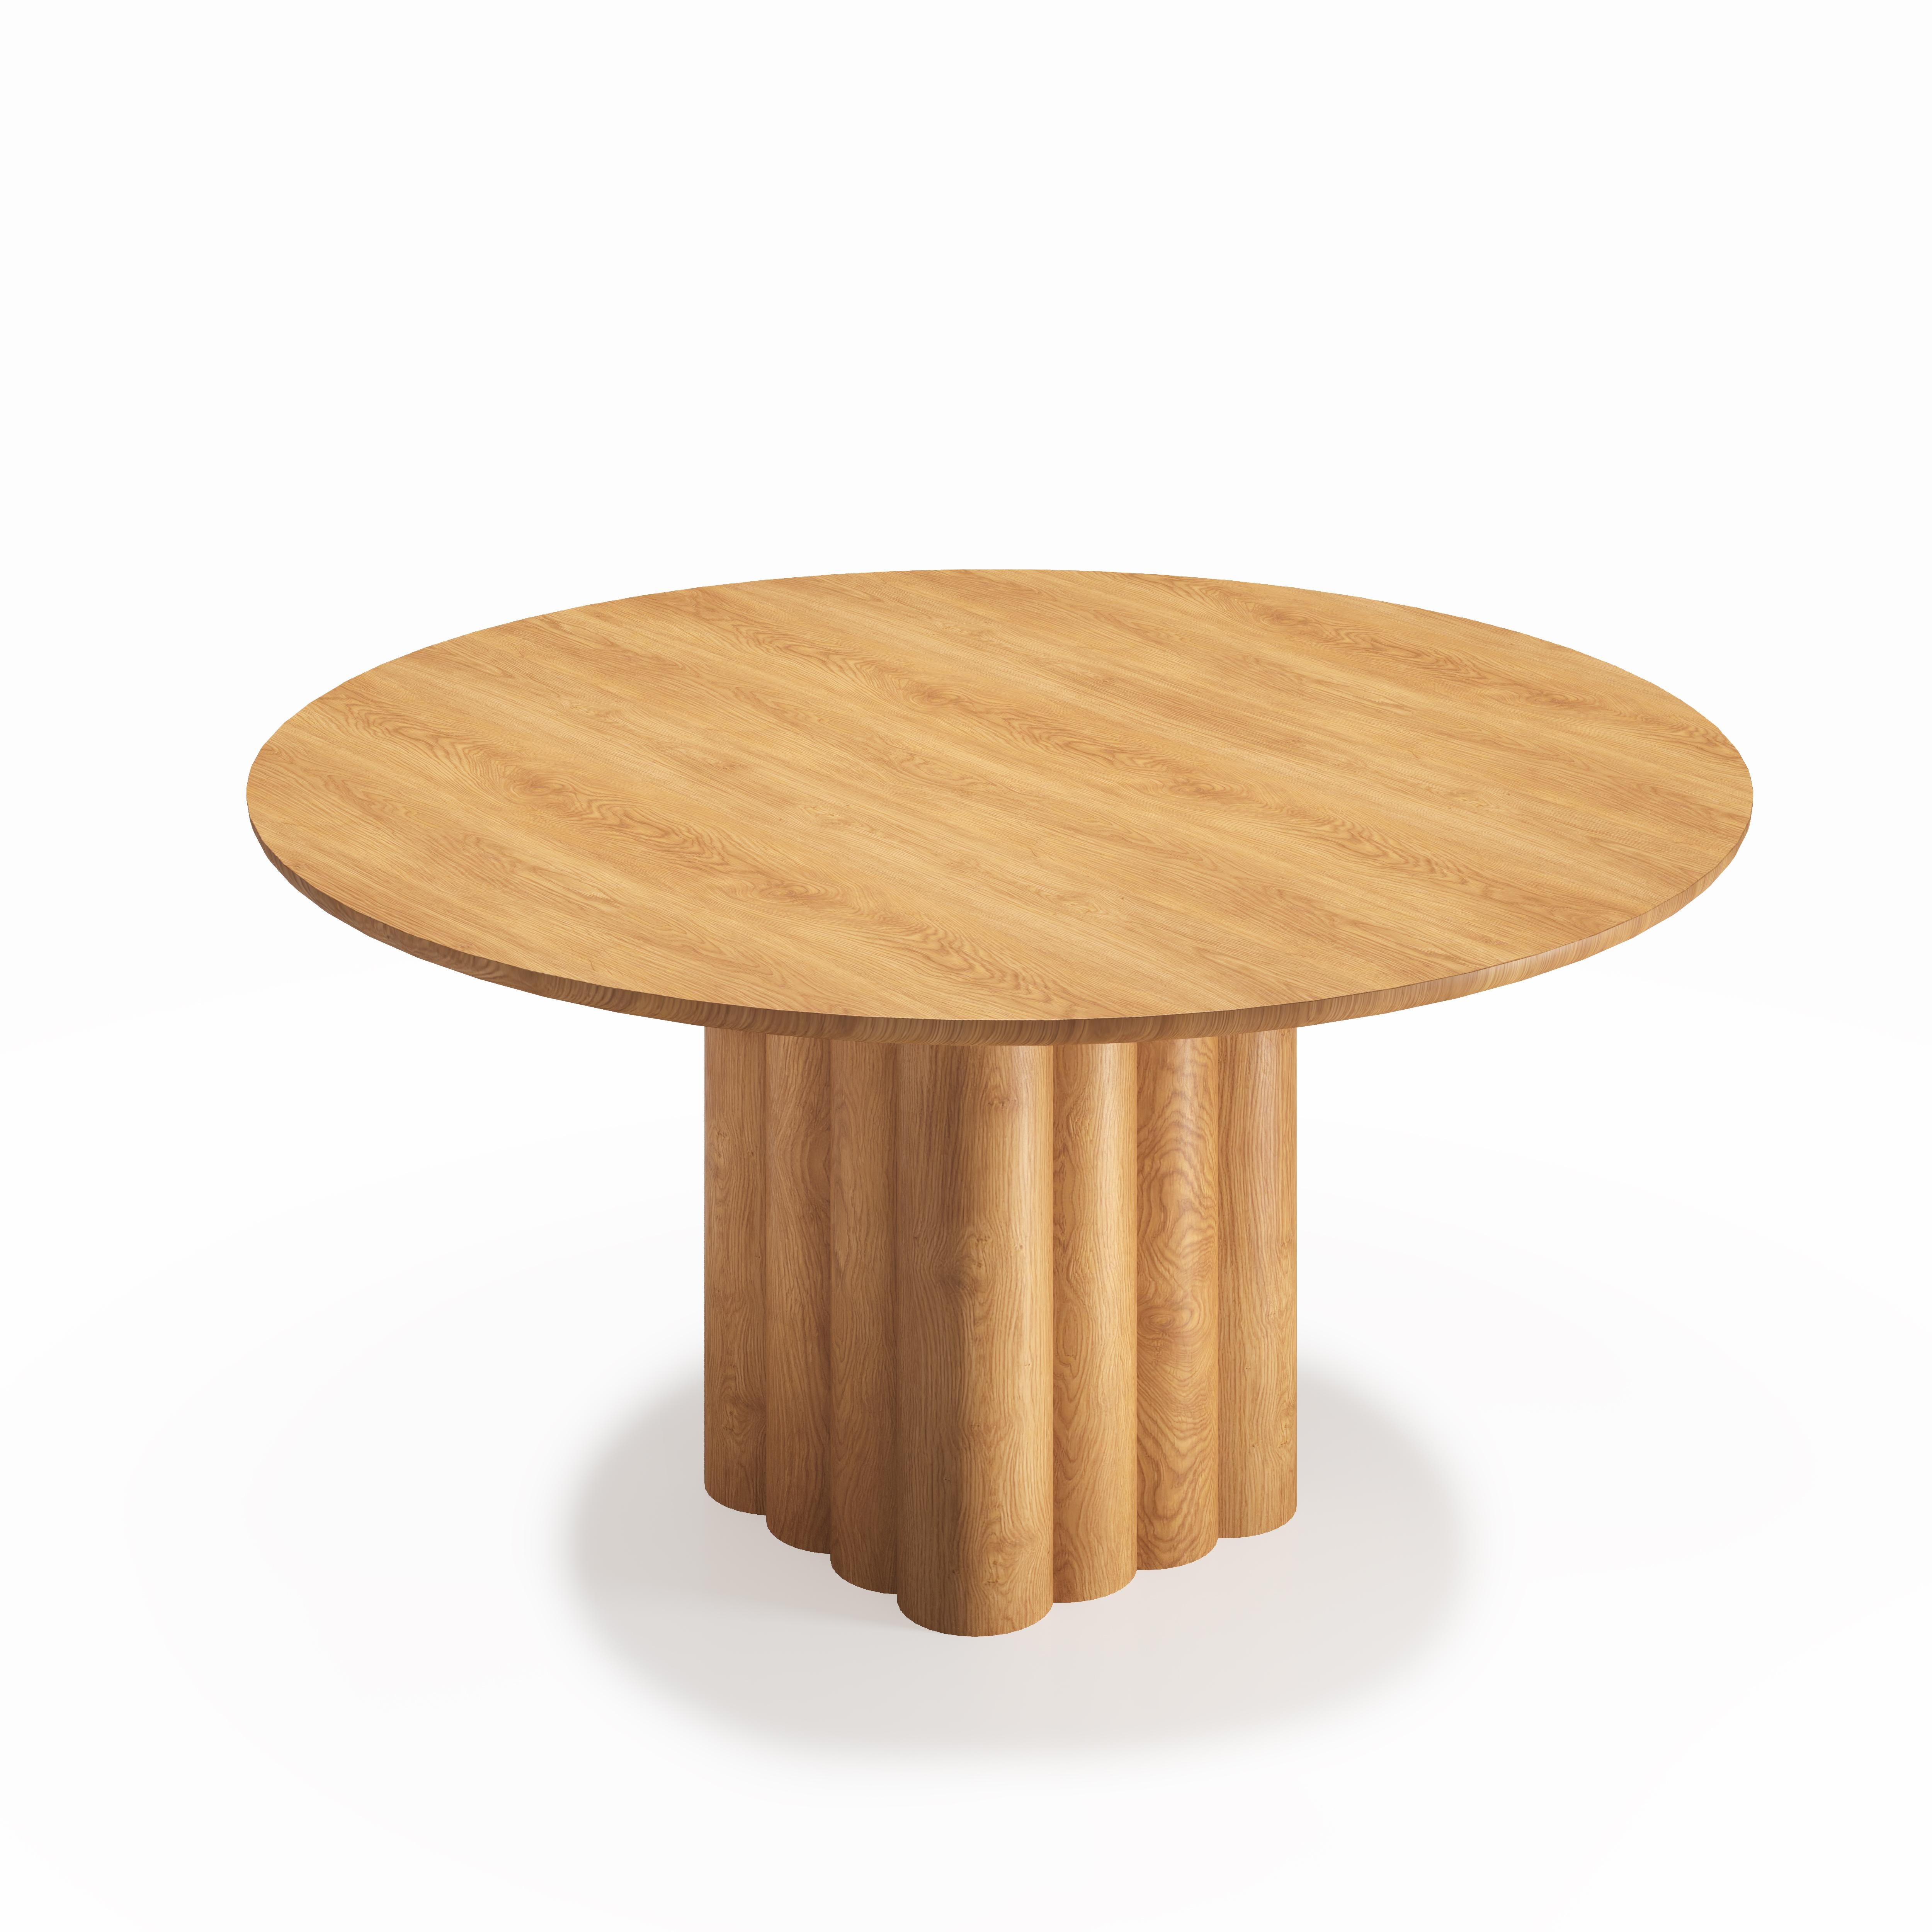 Round Dining Table 'Plush' by Dk3, Smoked Oak or Walnut, 150 cm For Sale 1